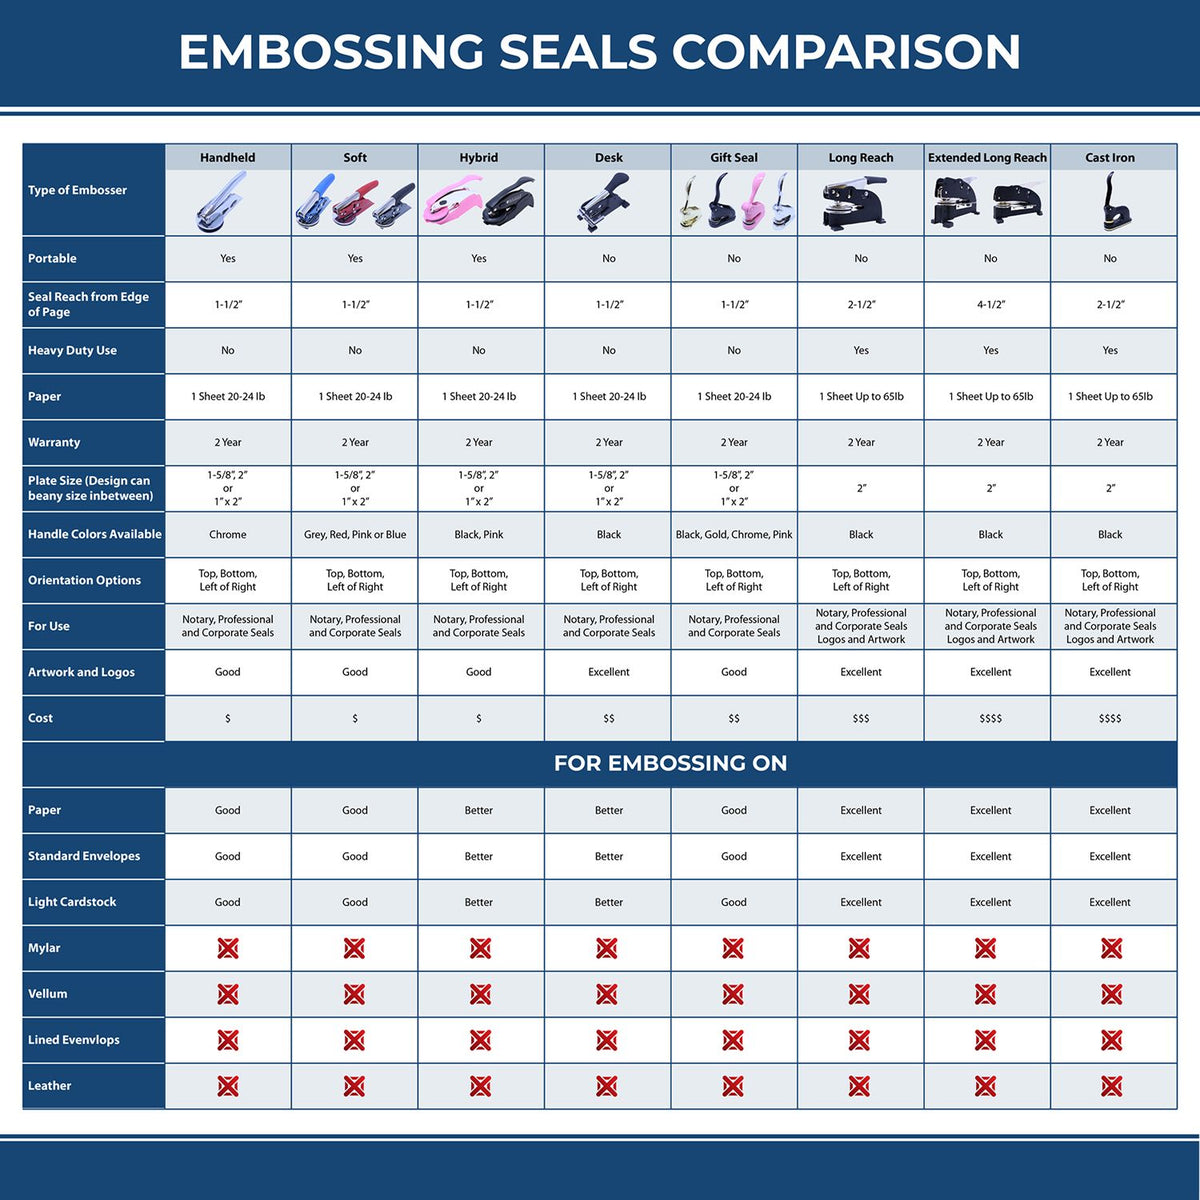 A comparison chart for the different types of mount models available for the Long Reach Colorado Land Surveyor Seal.